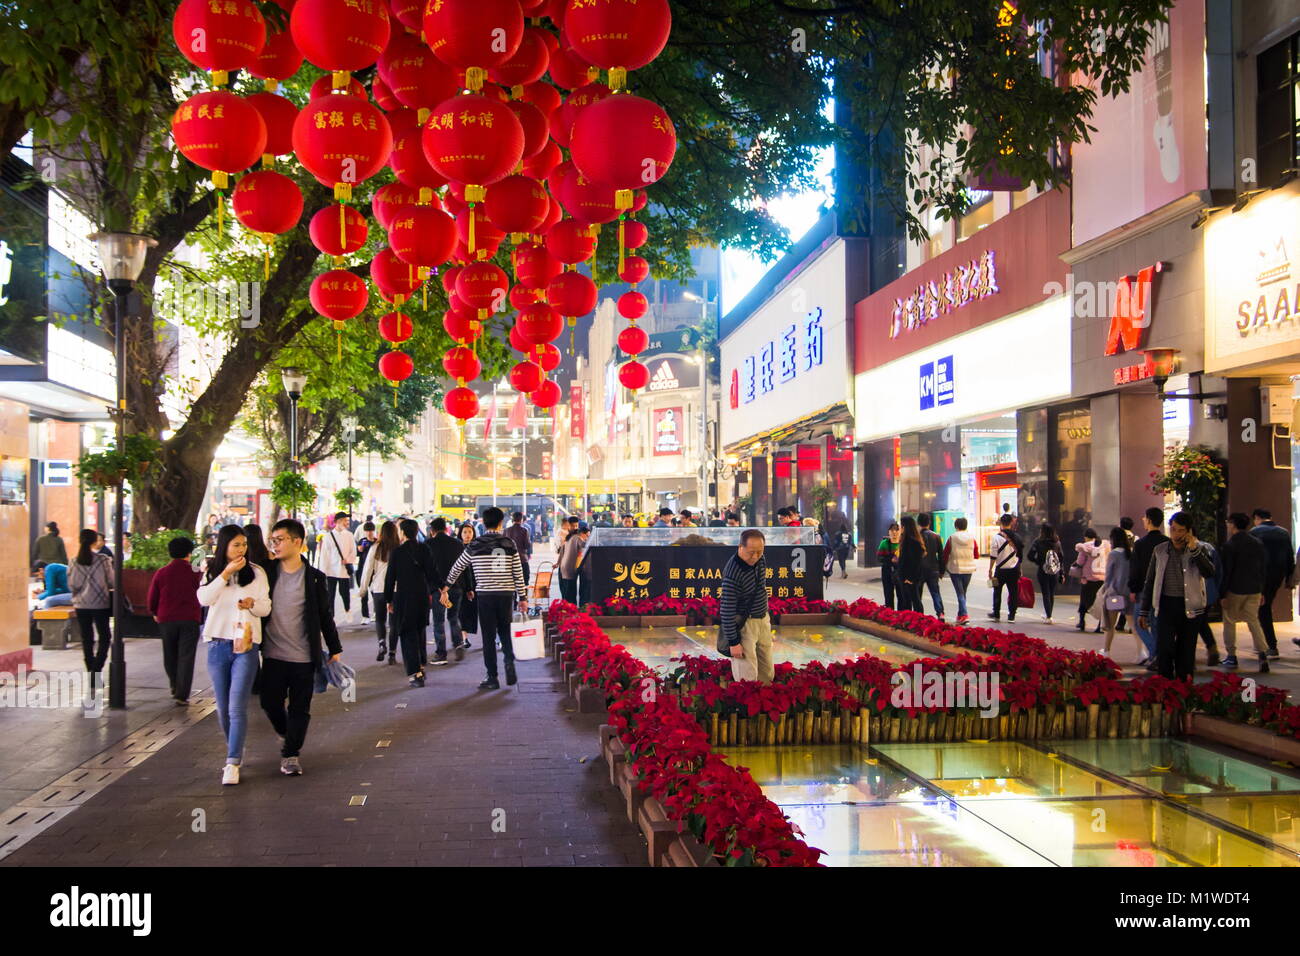 GUANGZHOU, CHINA - JANUARY 2, 2018: Beijing Road Pedestrian Street in old part of Guangzhou crowded with people and decorated for Spring festival at n Stock Photo